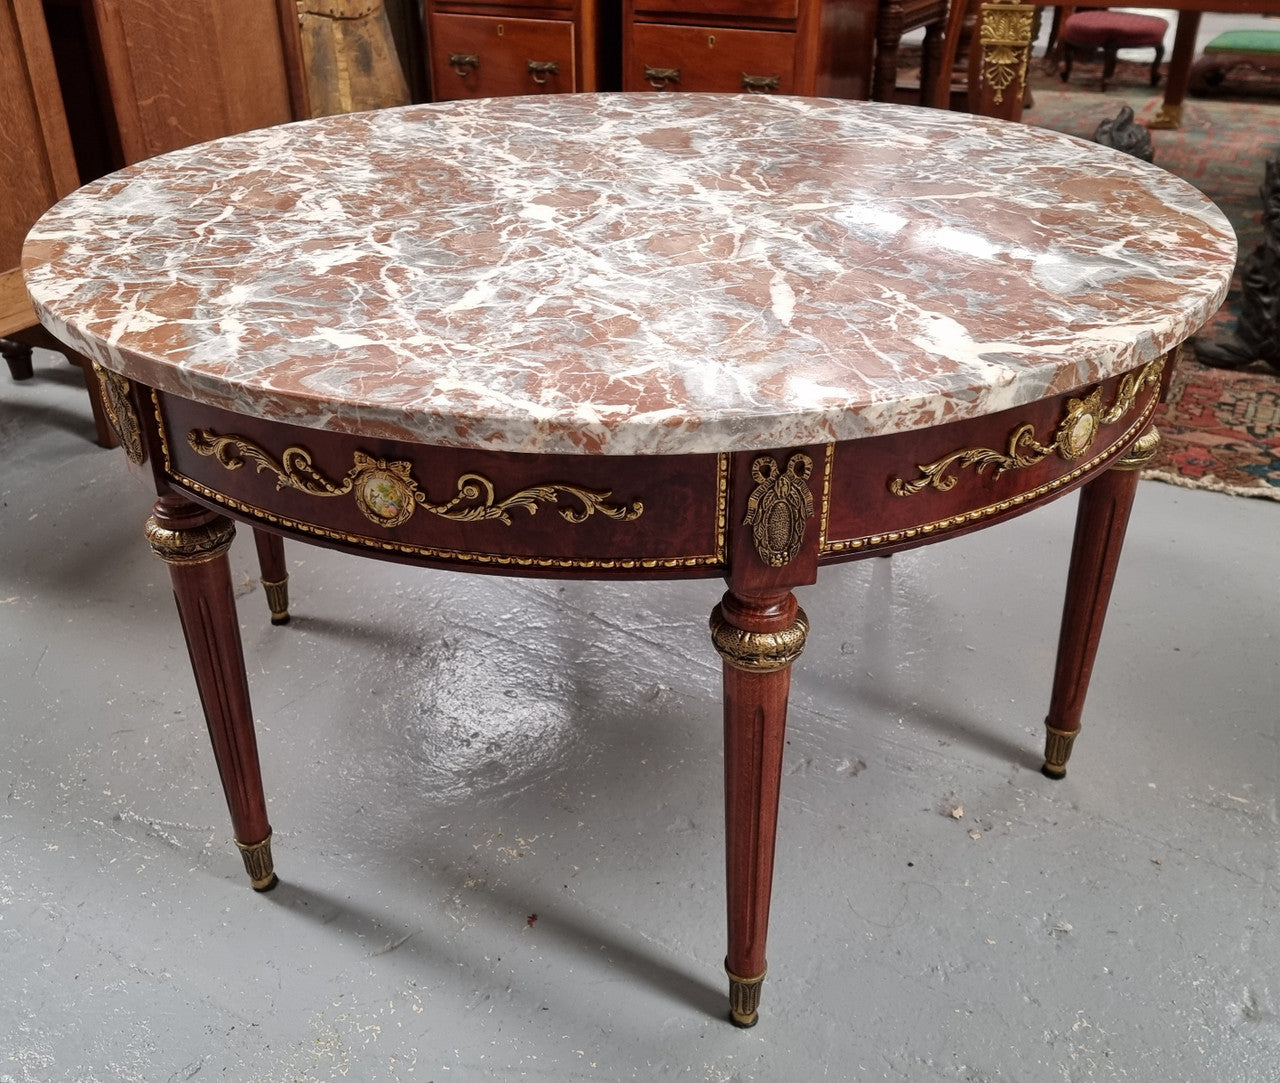 Stunning Antique French style Burr Walnut marble top coffee table. It has gilt metal mounts all around the top edge, with more down the fluted legs & feet. It also has exquisite painted porcelain plaques encased in gilt metal laurel wreaths all around the top edge. It is also stamped underneath "Muarva S.L. Made In Spain". It is in good original detailed condition.